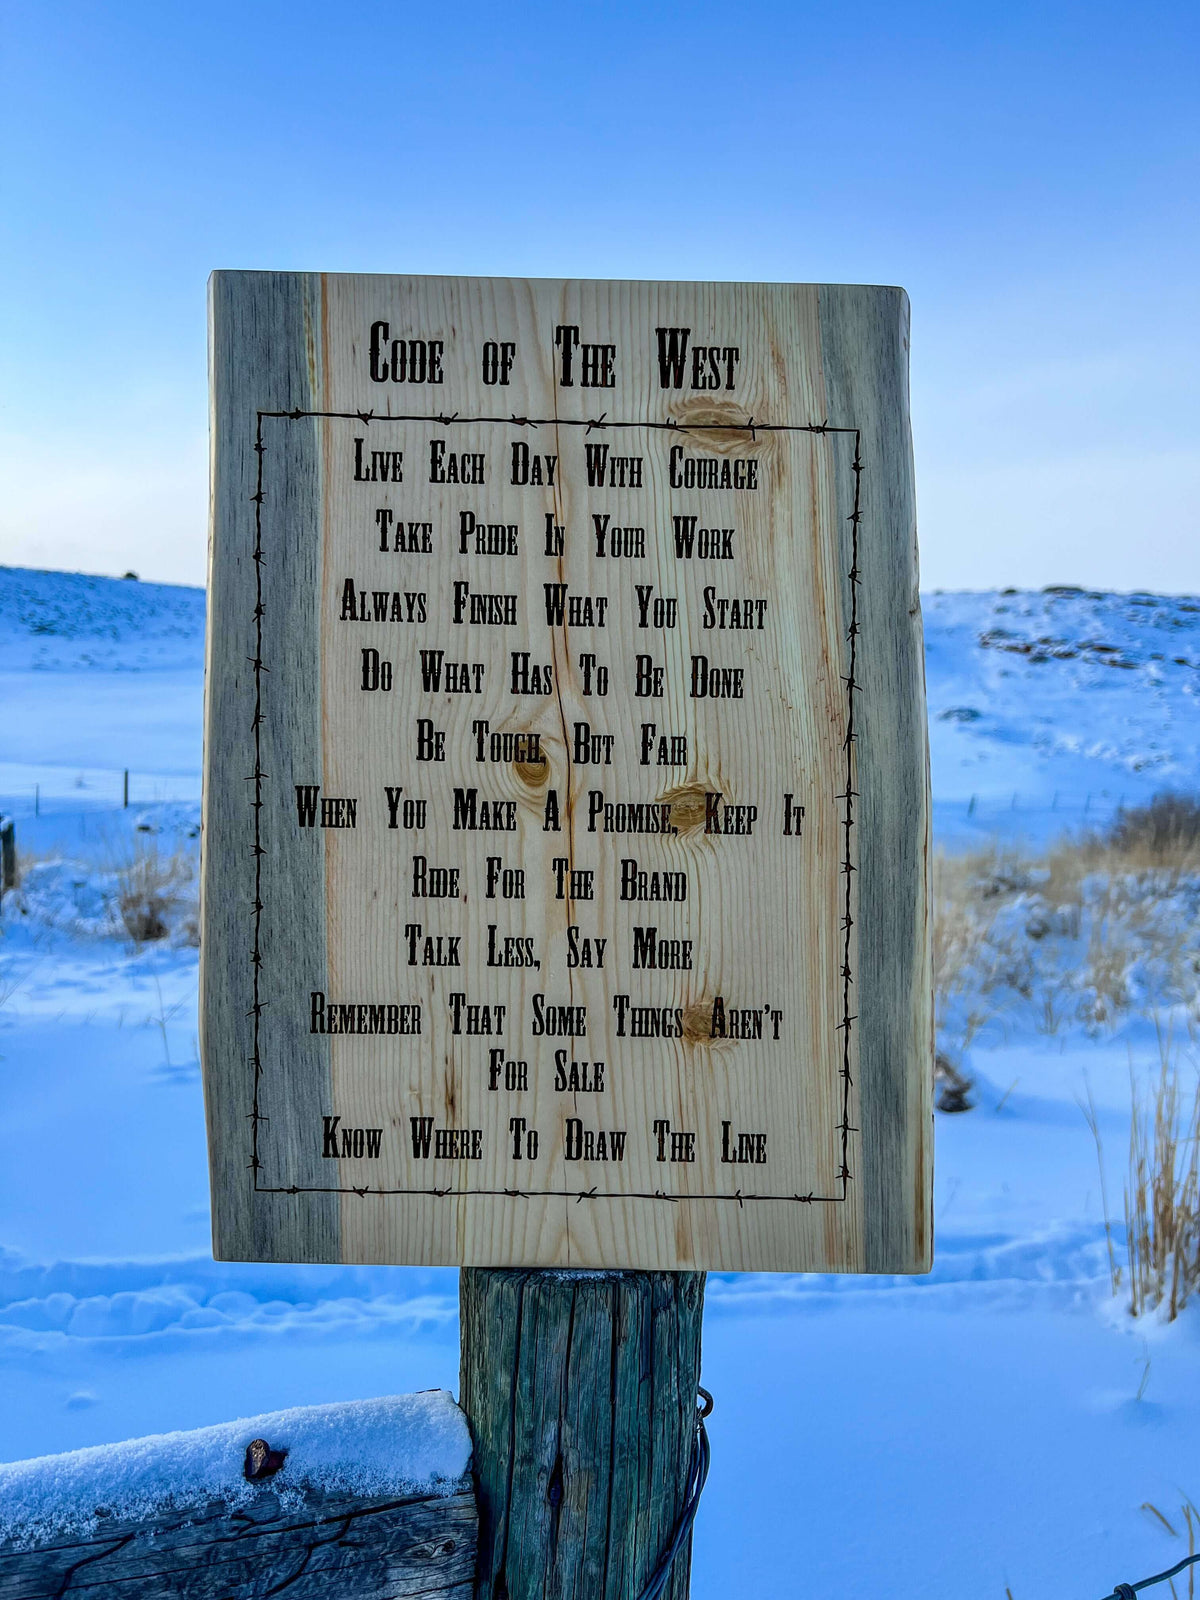 Code of the West wording laser engraved on pine, displayed on fence post in Wyoming landscape